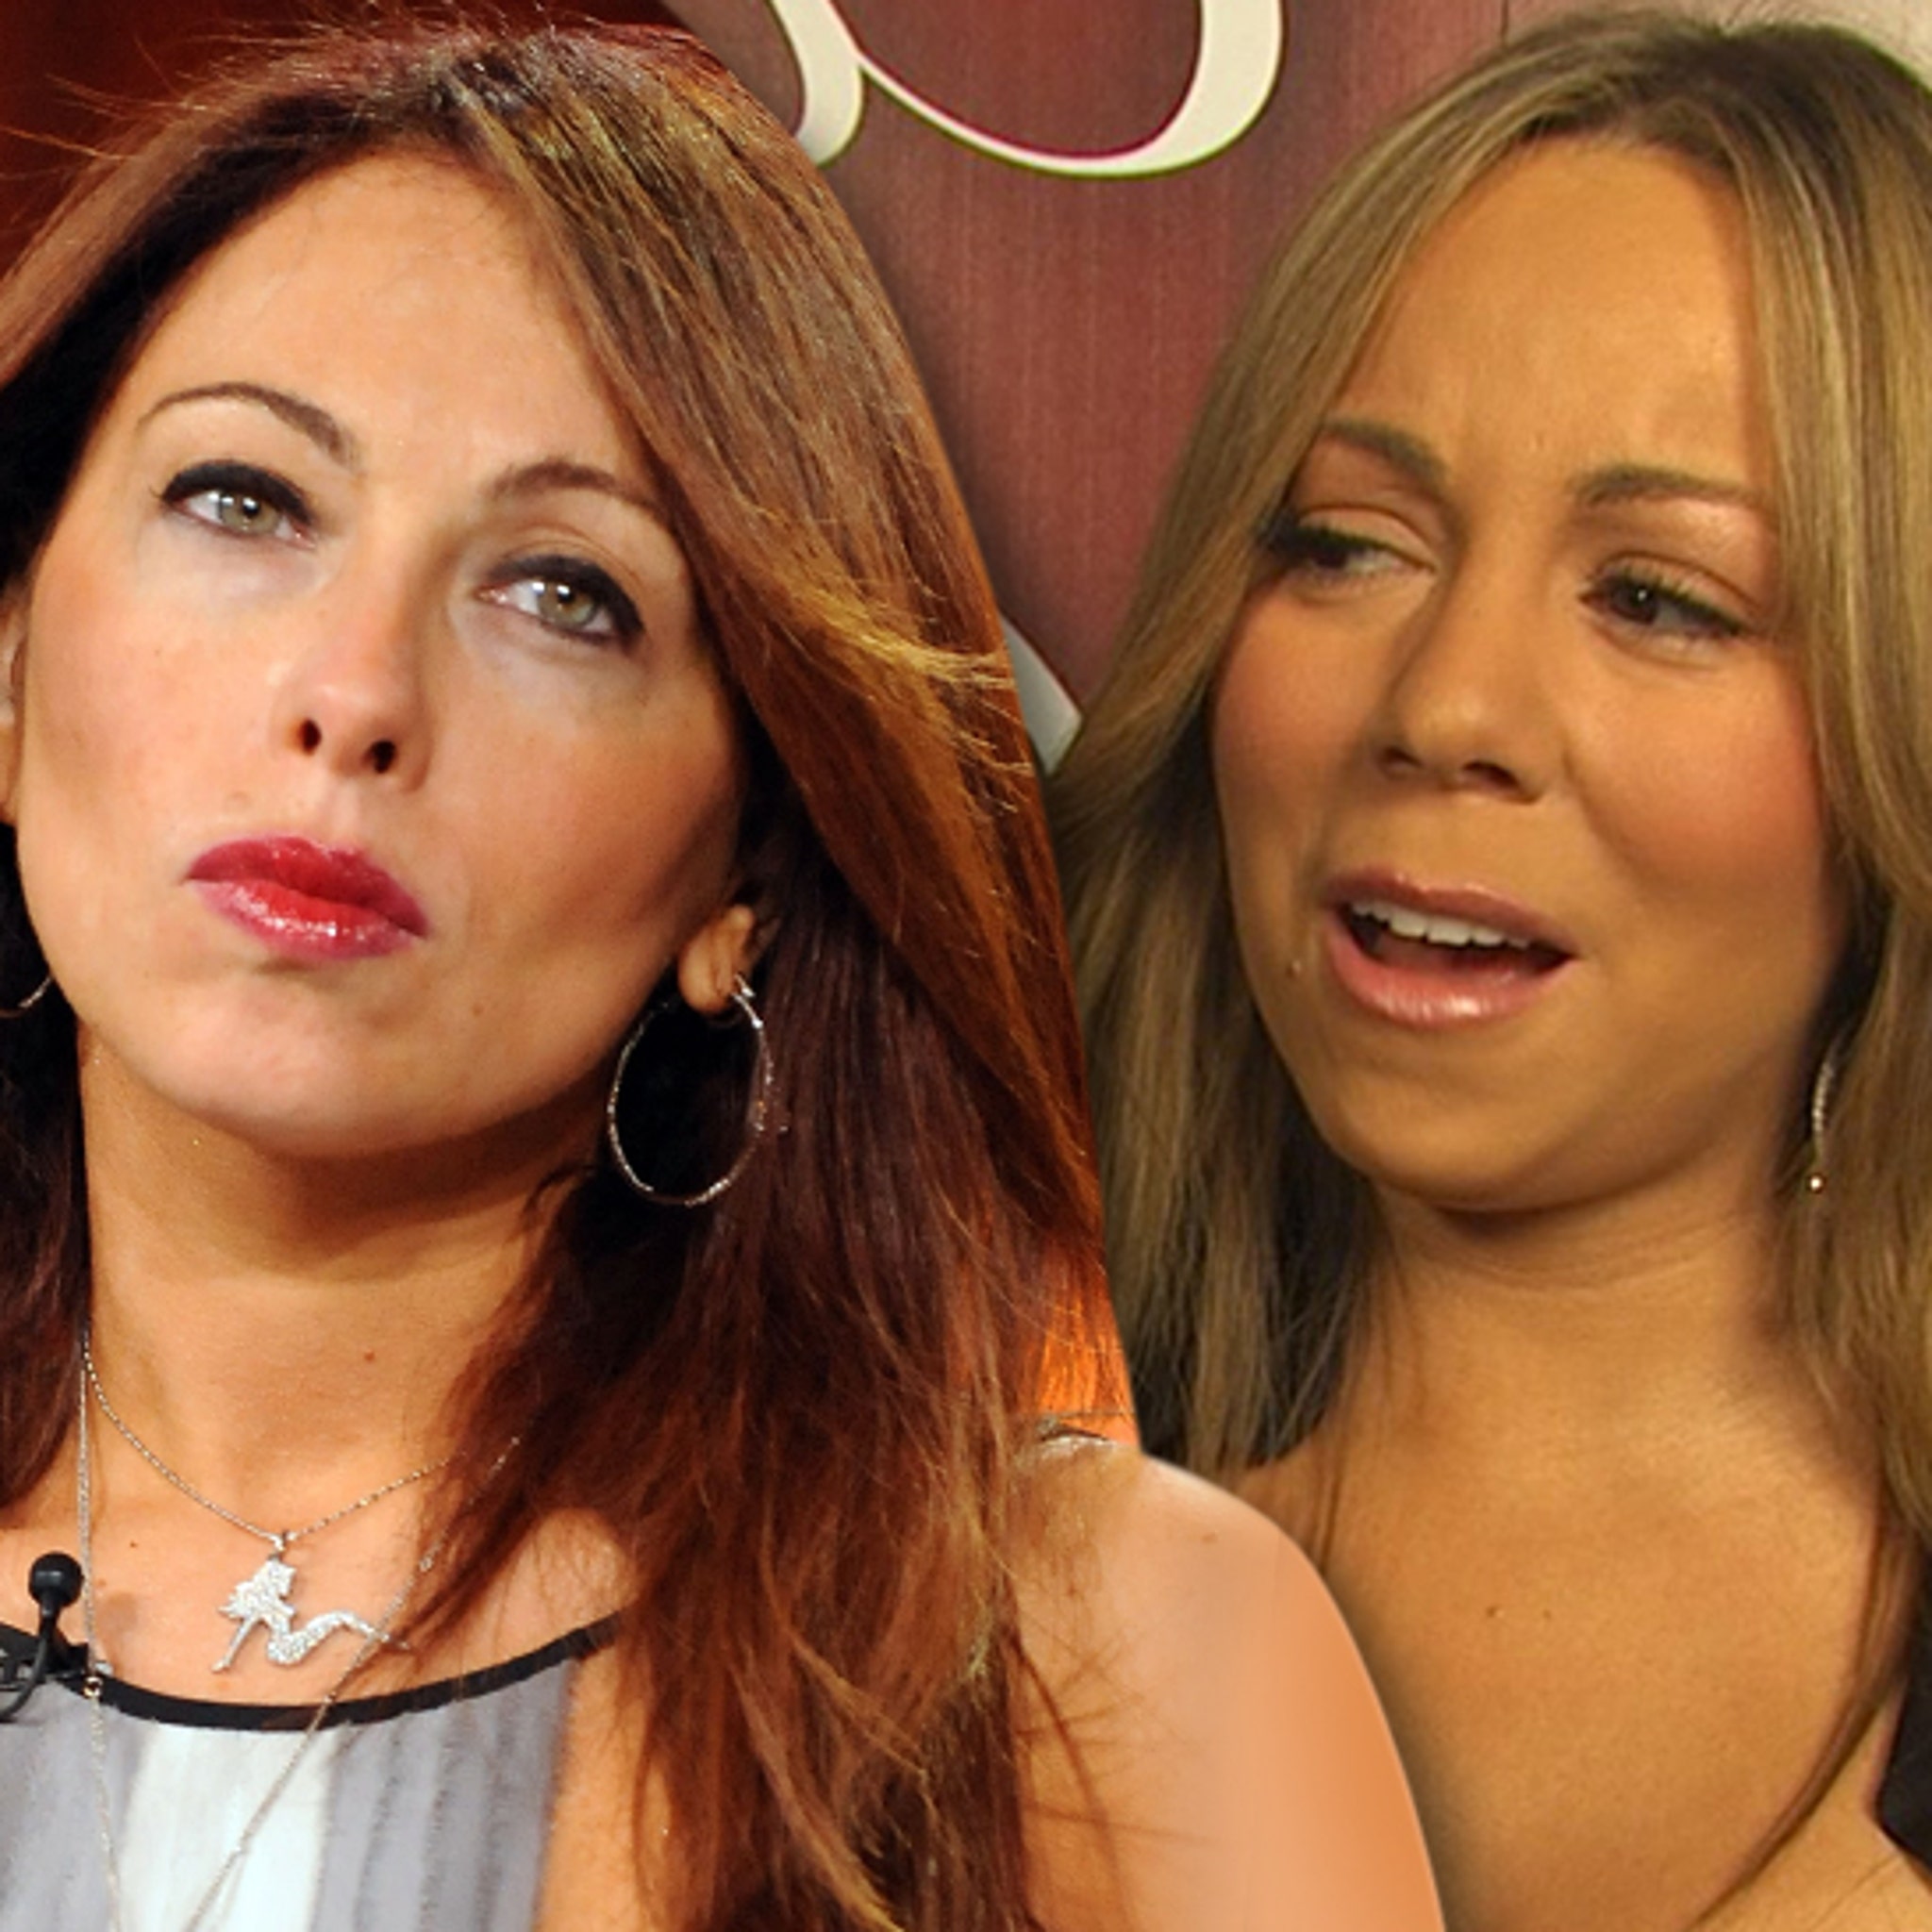 Mariah Careys Former Manager is Claiming Sexual Harassment image pic